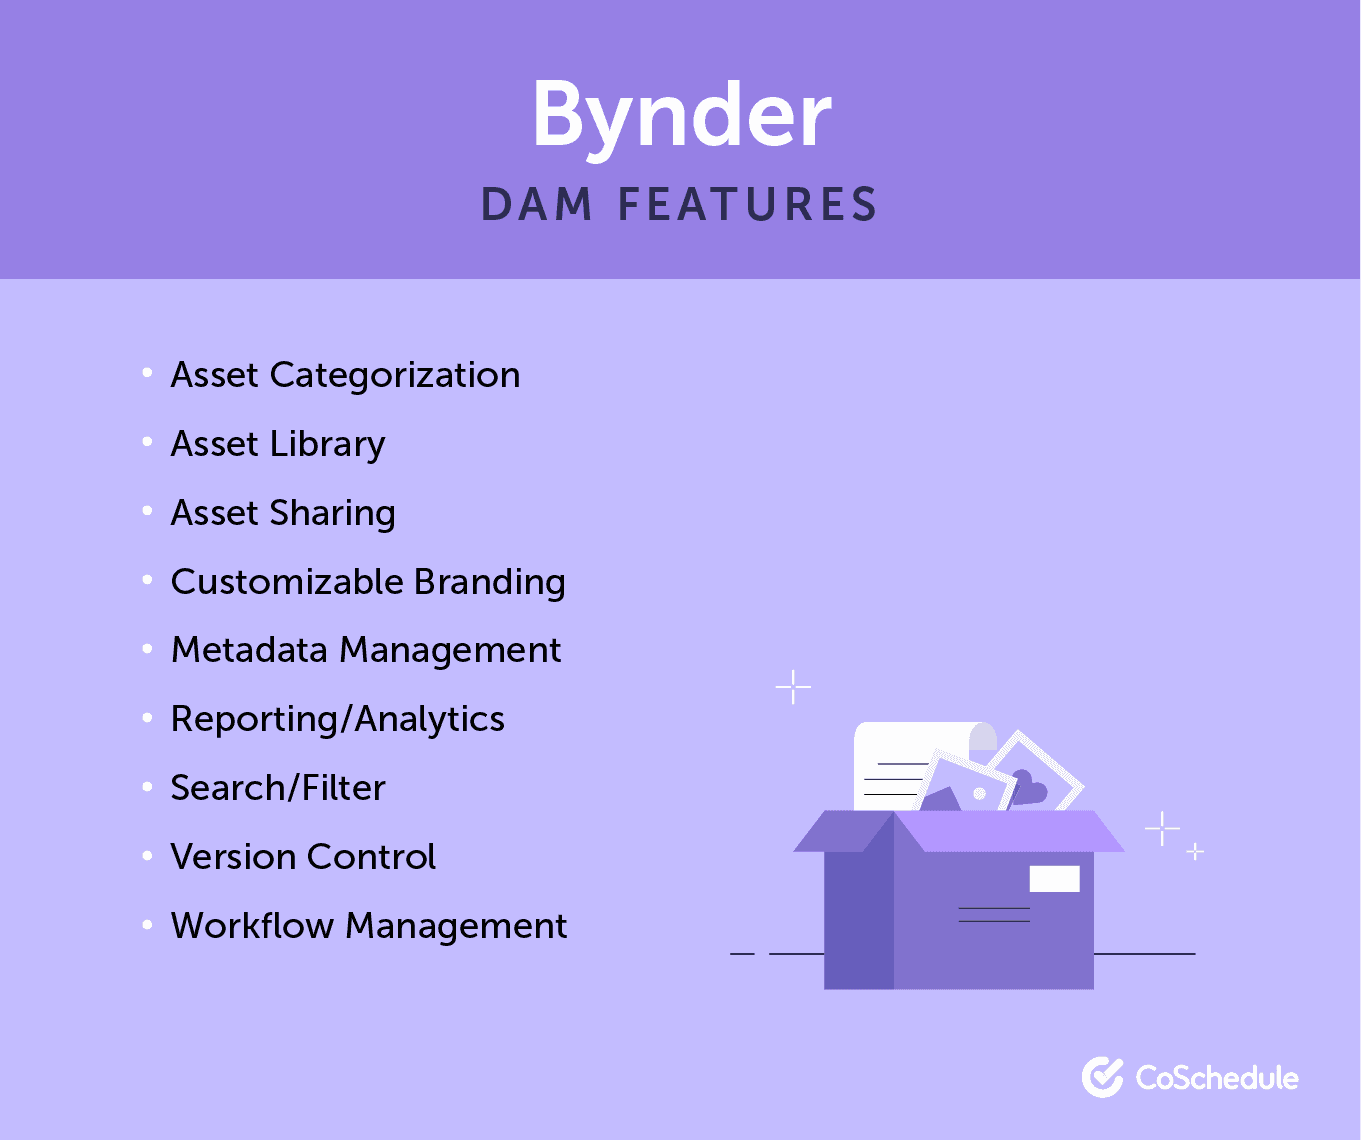 Bynder DAM Features